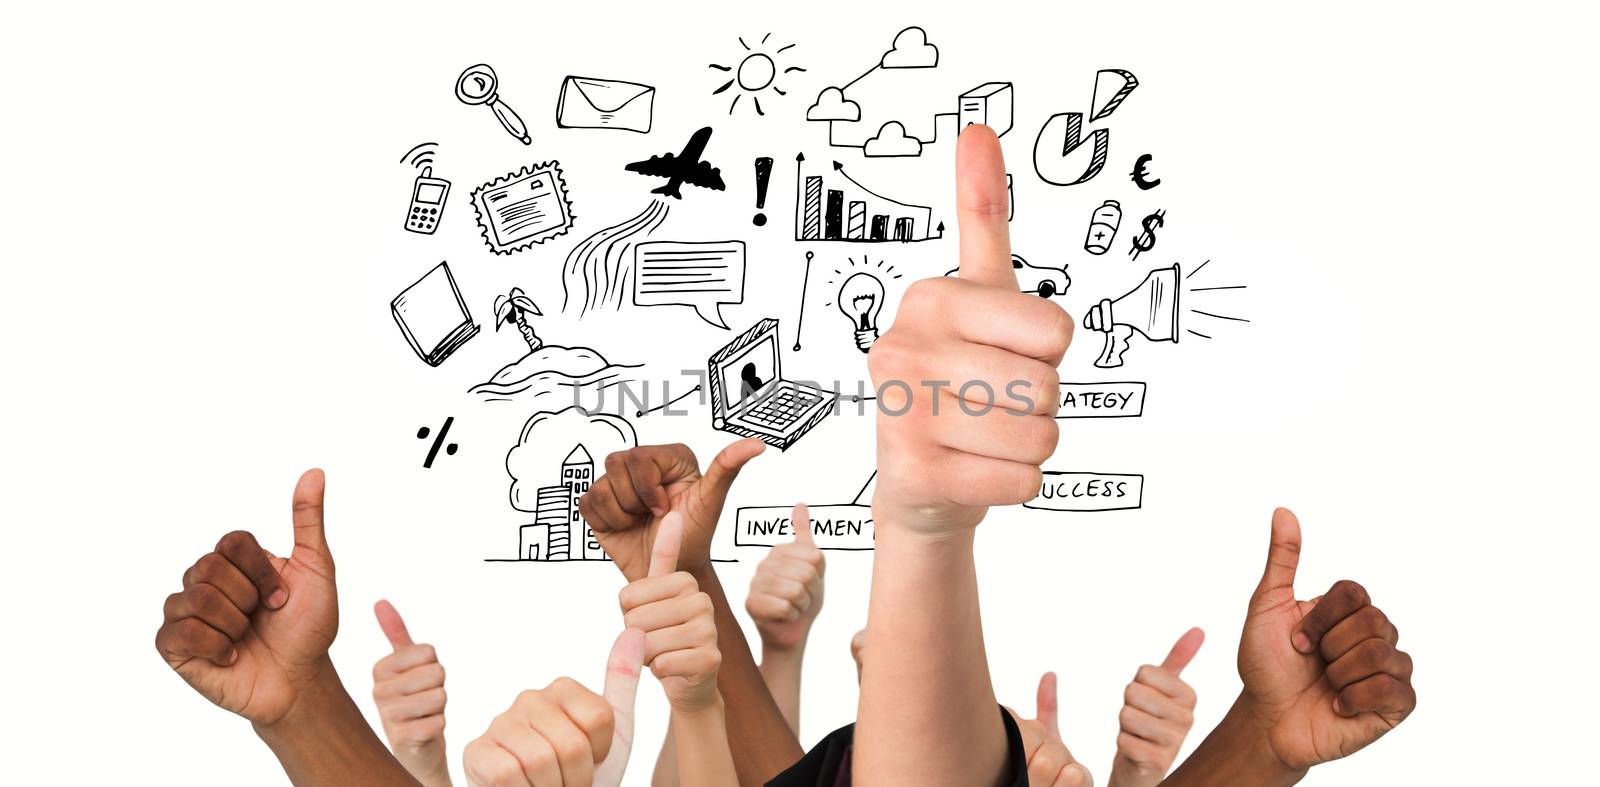 Hands showing thumbs up against brainstorm graphic